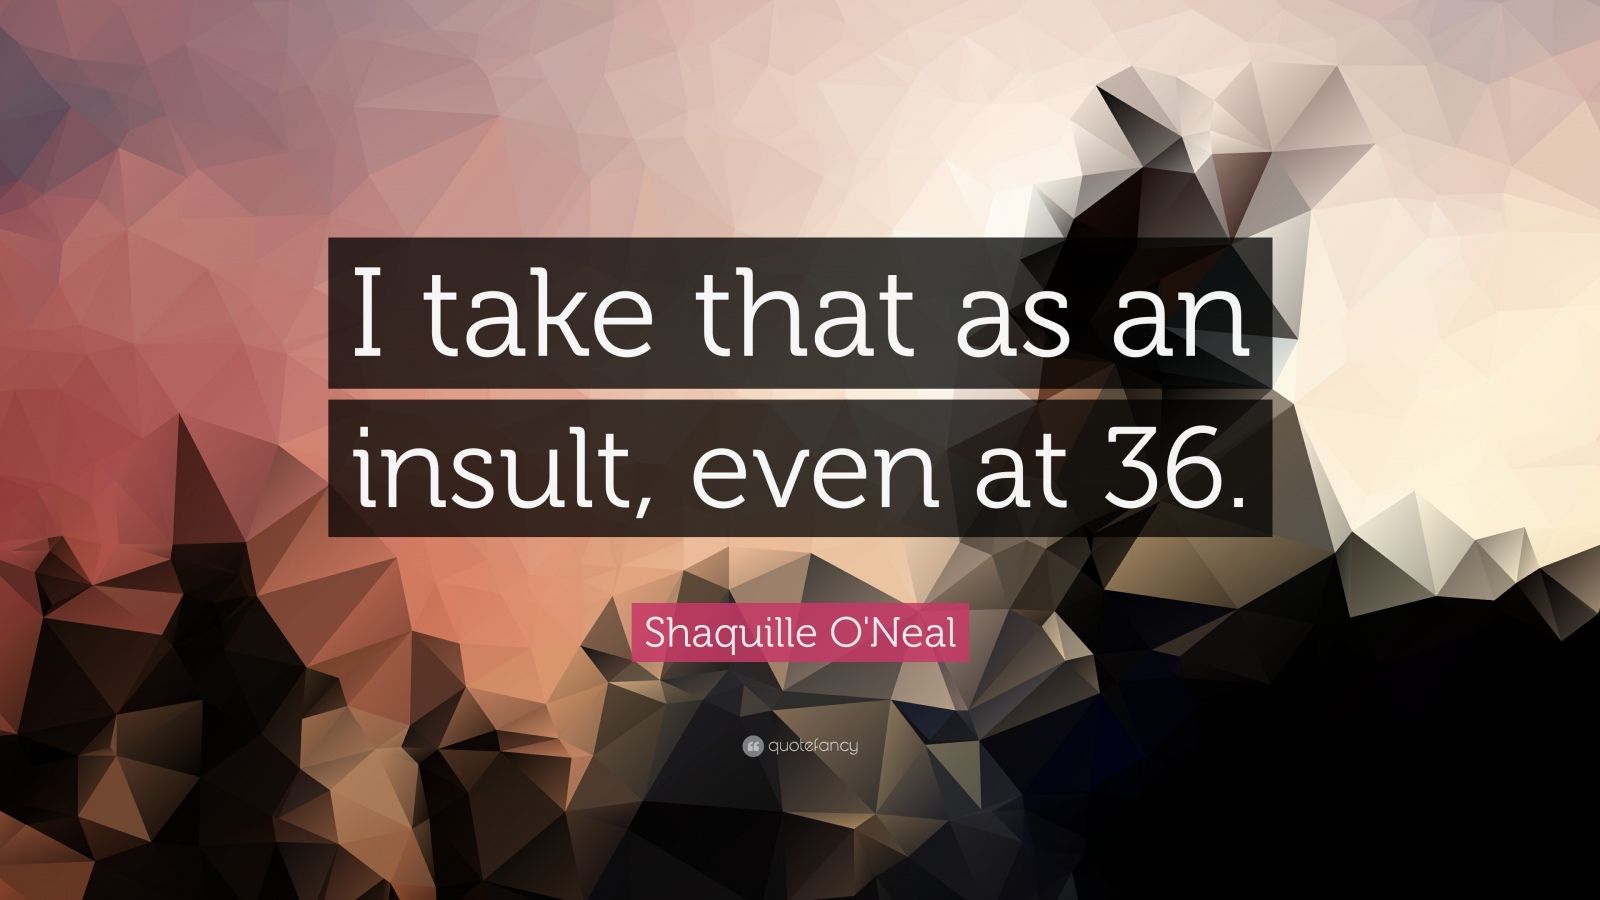 Shaquille O'Neal Quote: “I take that as an insult, even at 36.”